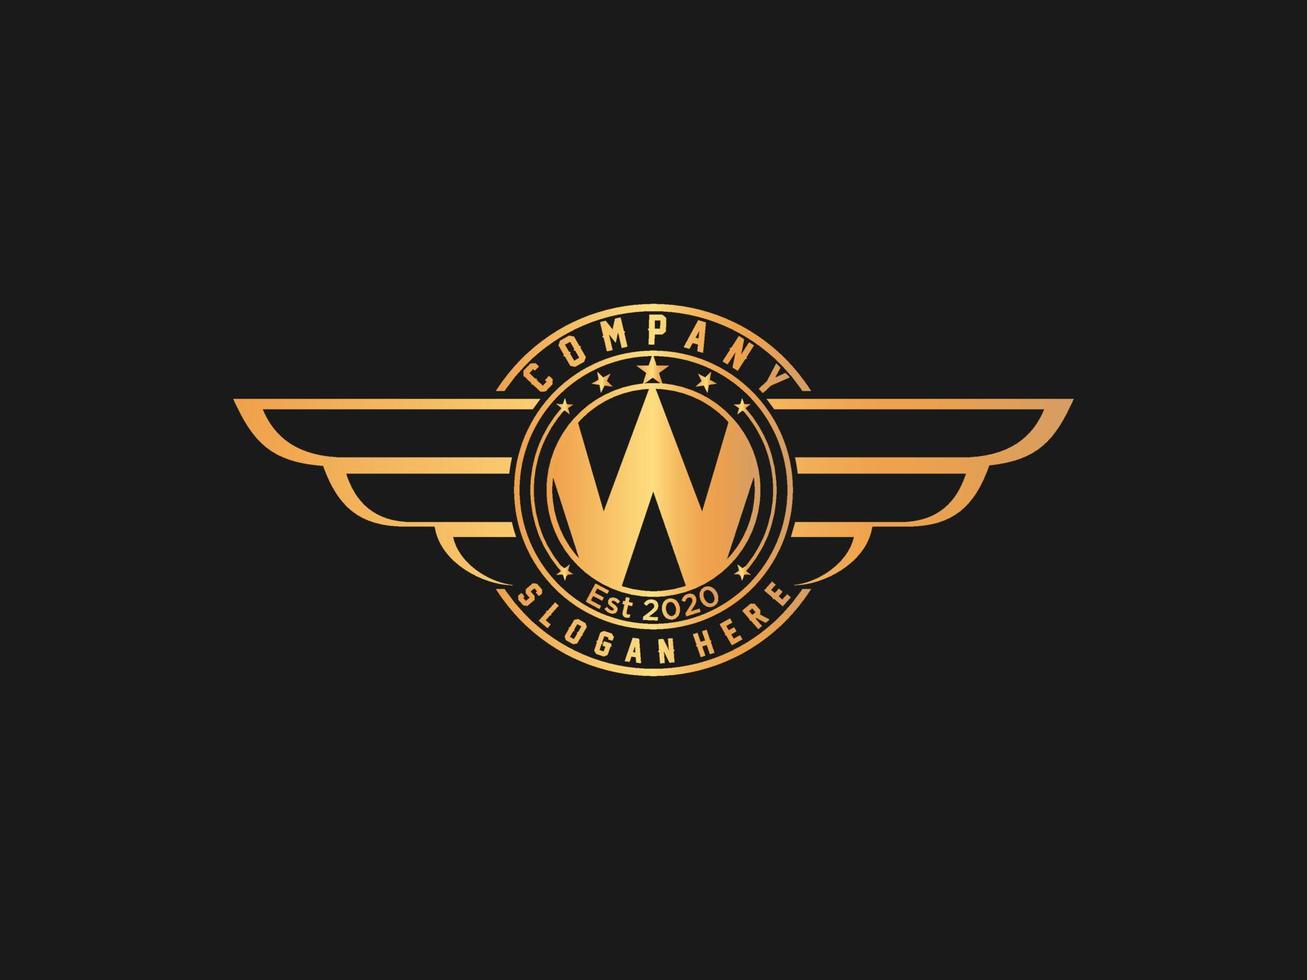 Retro Gold wings badge with letter W . vintage logo vector design element